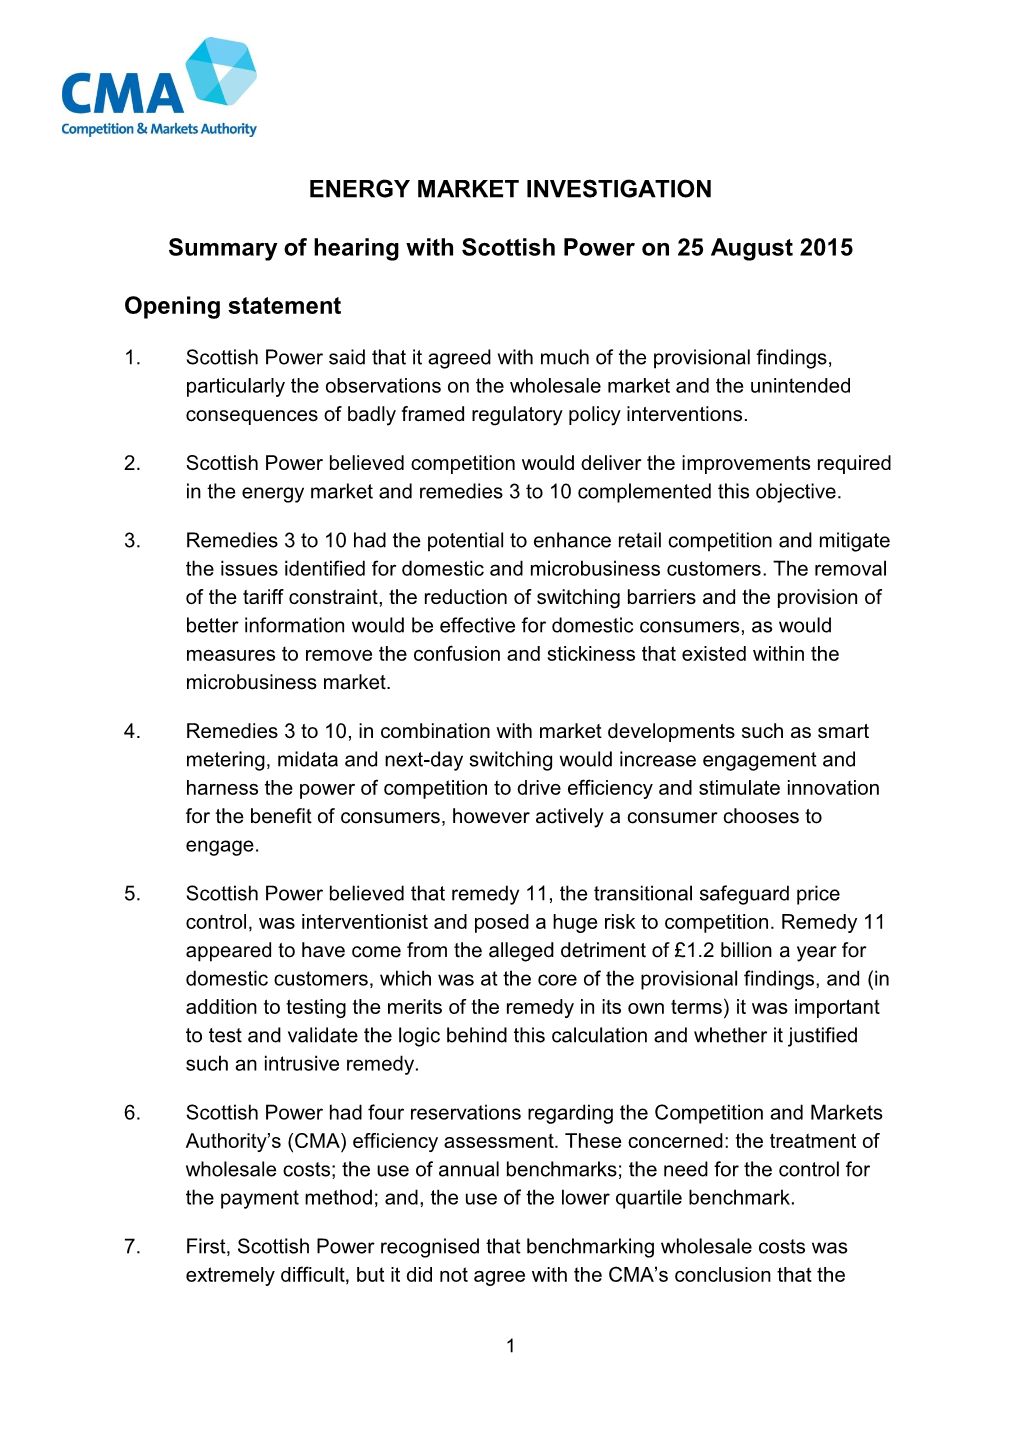 ENERGY MARKET INVESTIGATION Summary of Hearing with Scottish Power on 25 August 2015 Opening Statement